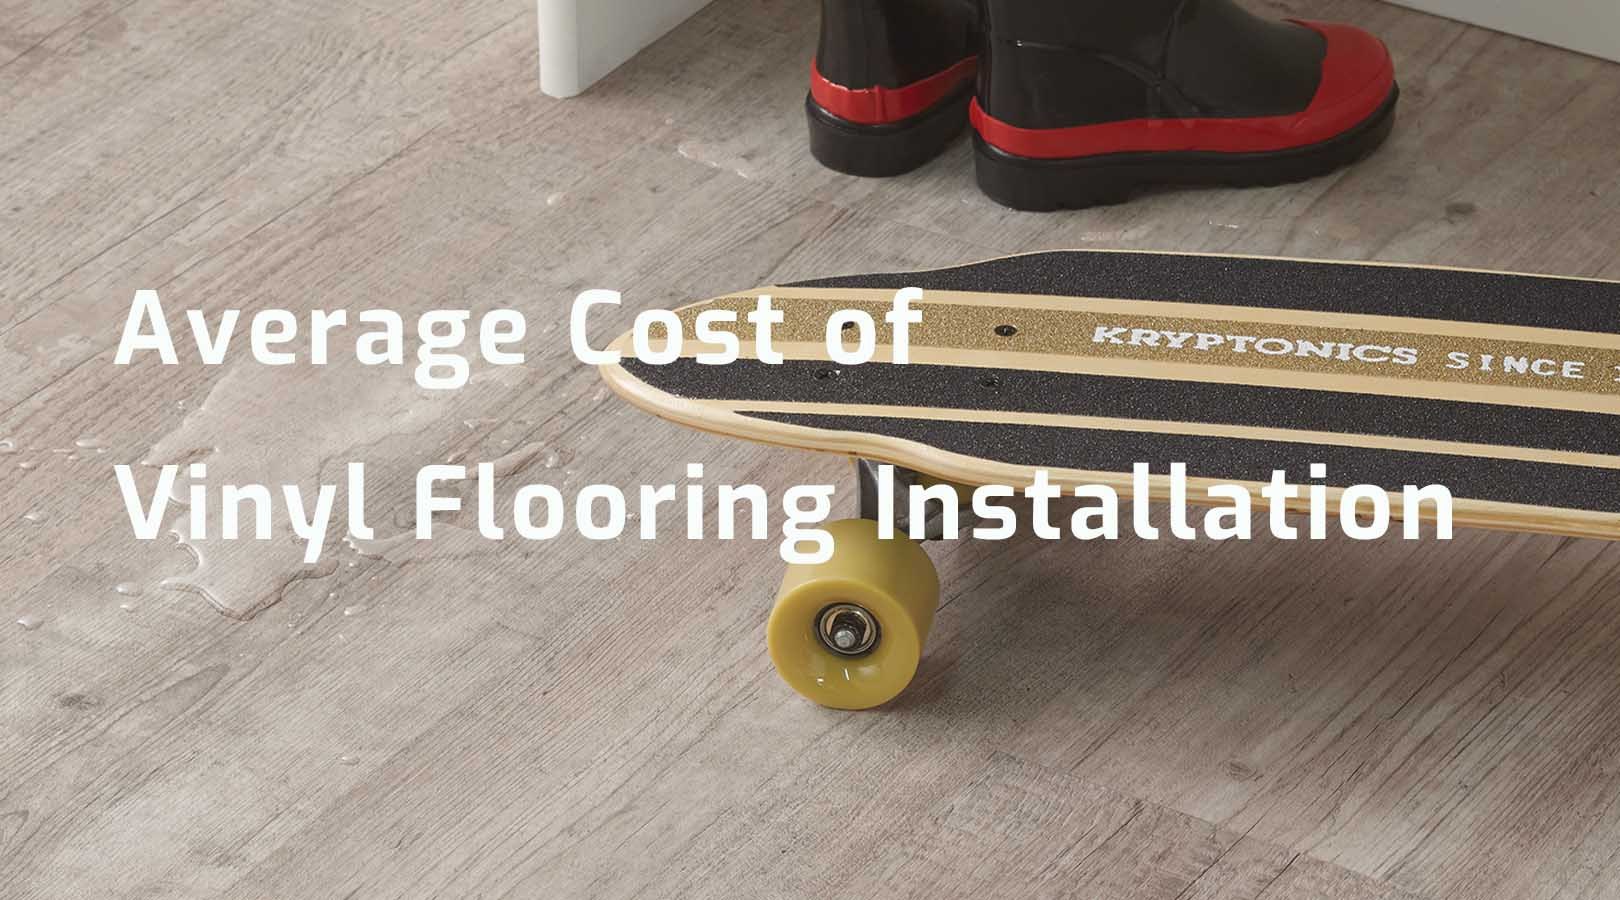 How much does it cost to install vinyl flooring?